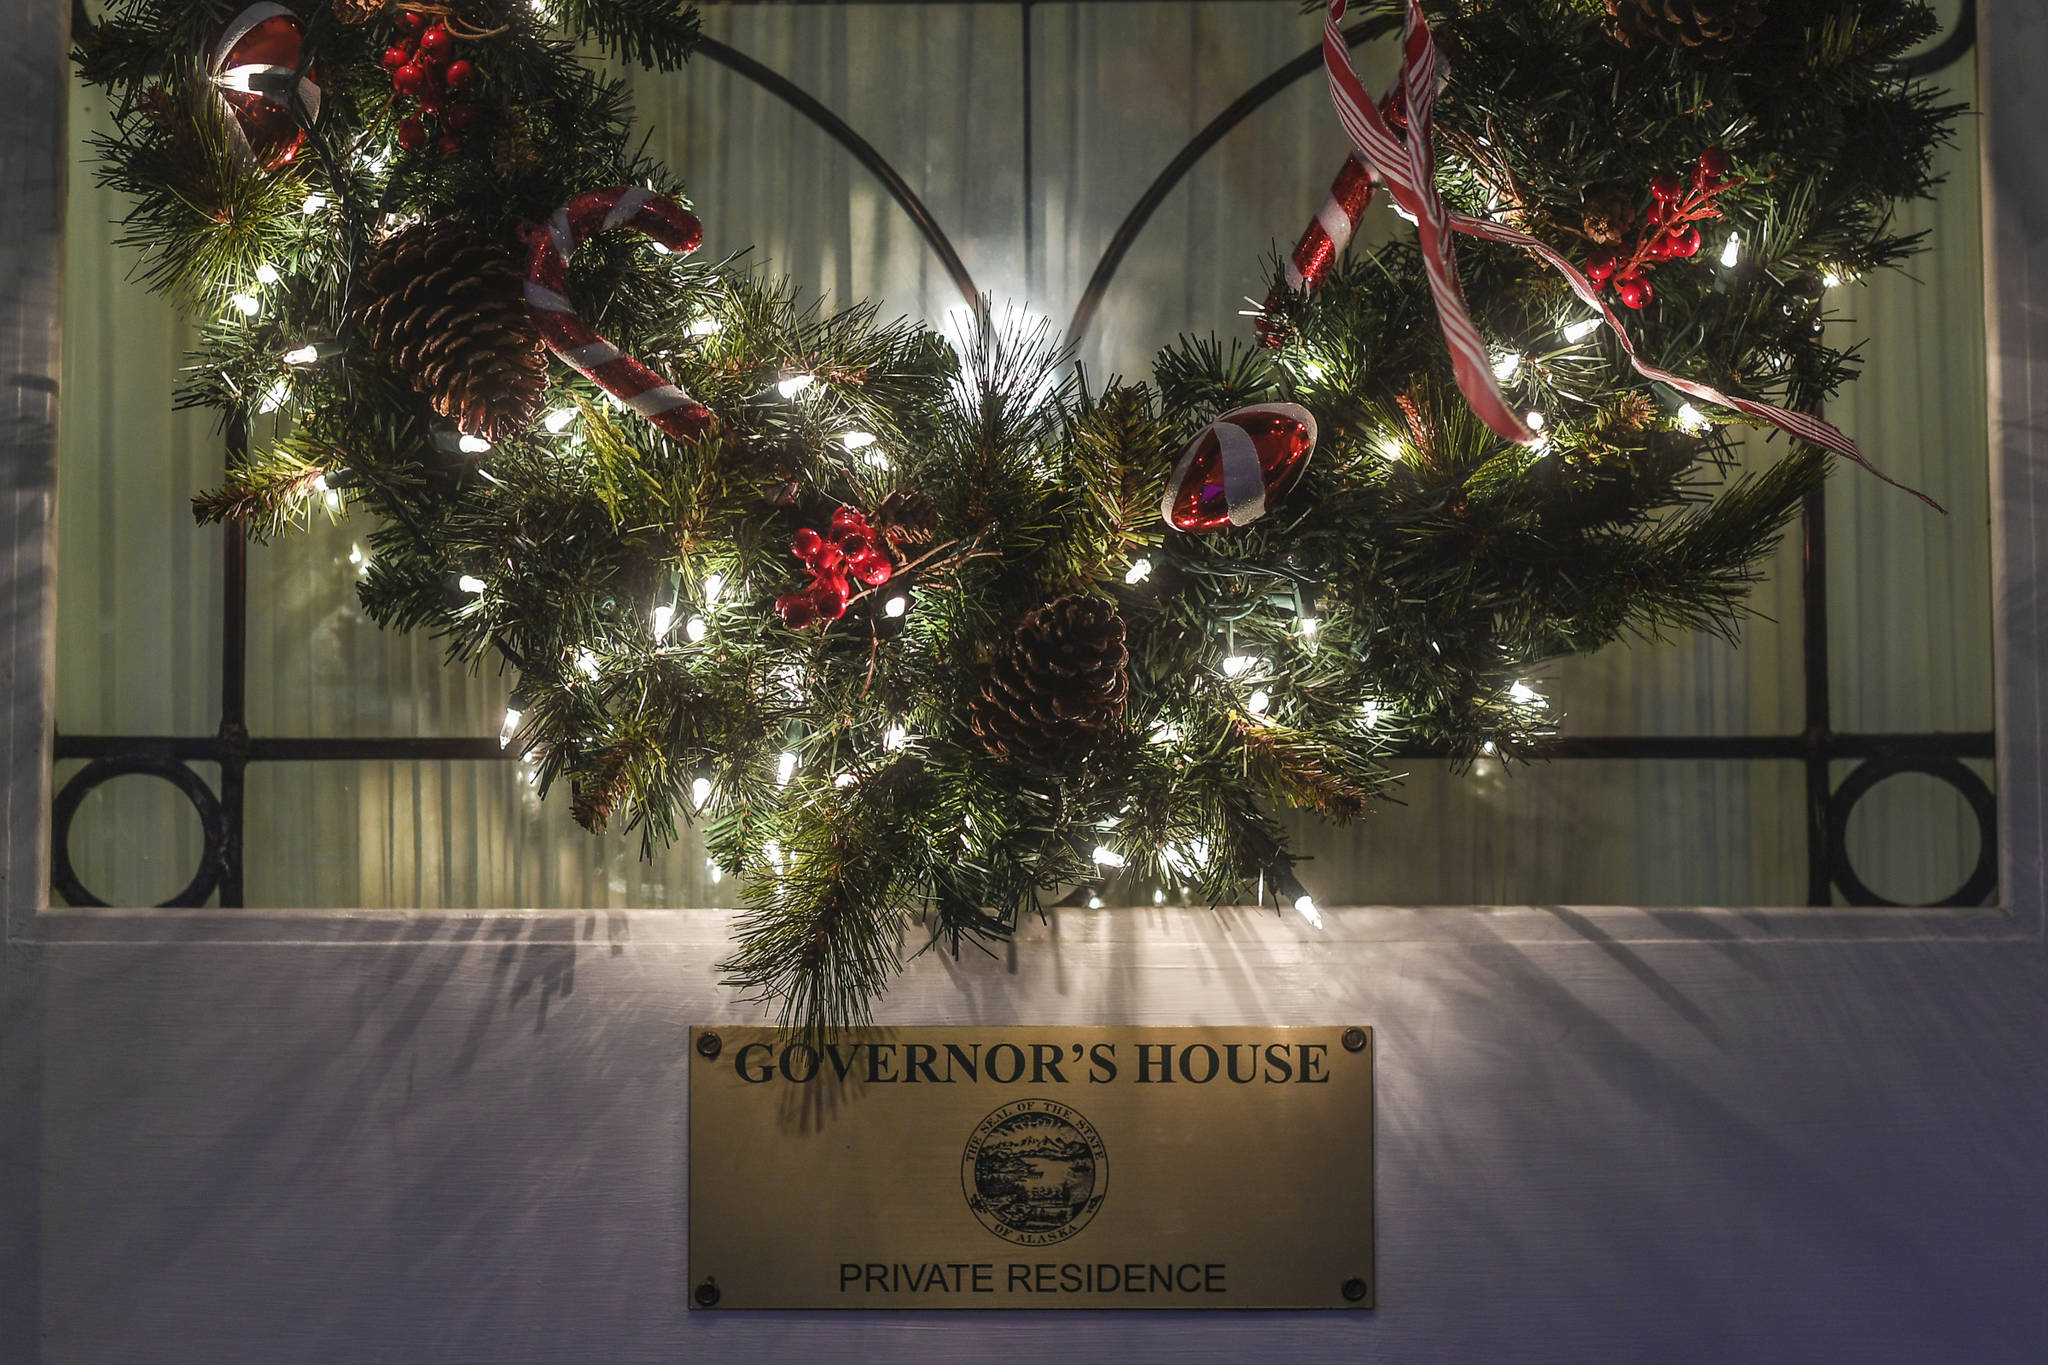 A holiday wreath decorates the front door at the Governor’s House on Wednesday, Dec. 4, 2019. The annual Governor’s Open House is Tuesday, Dec. 10. (Michael Penn | Juneau Empire)